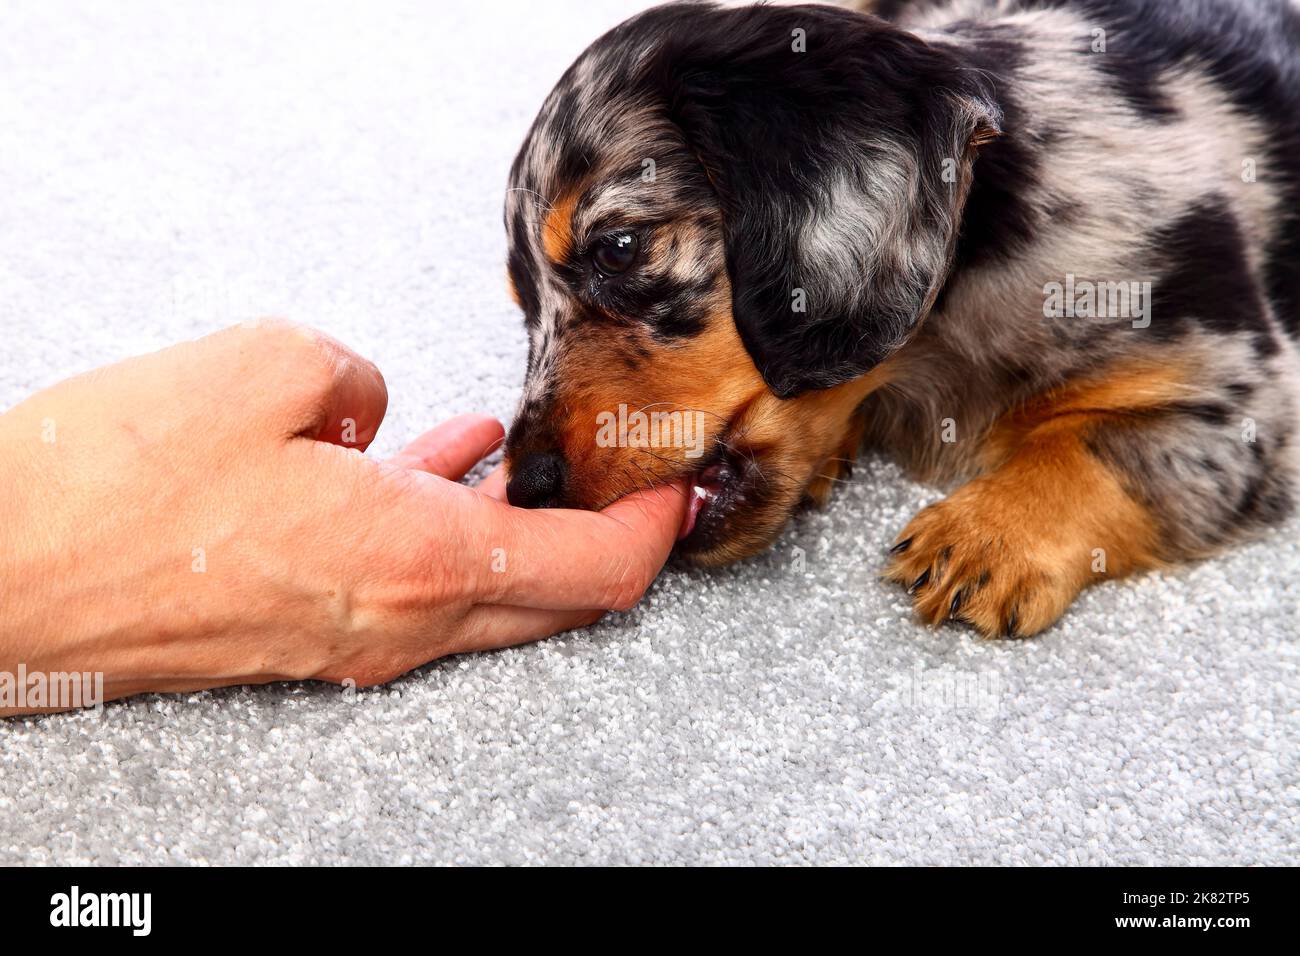 Cute puppy Dachshund laid on a grey carpet chewing the fingers of a woman's hand teething concept Stock Photo